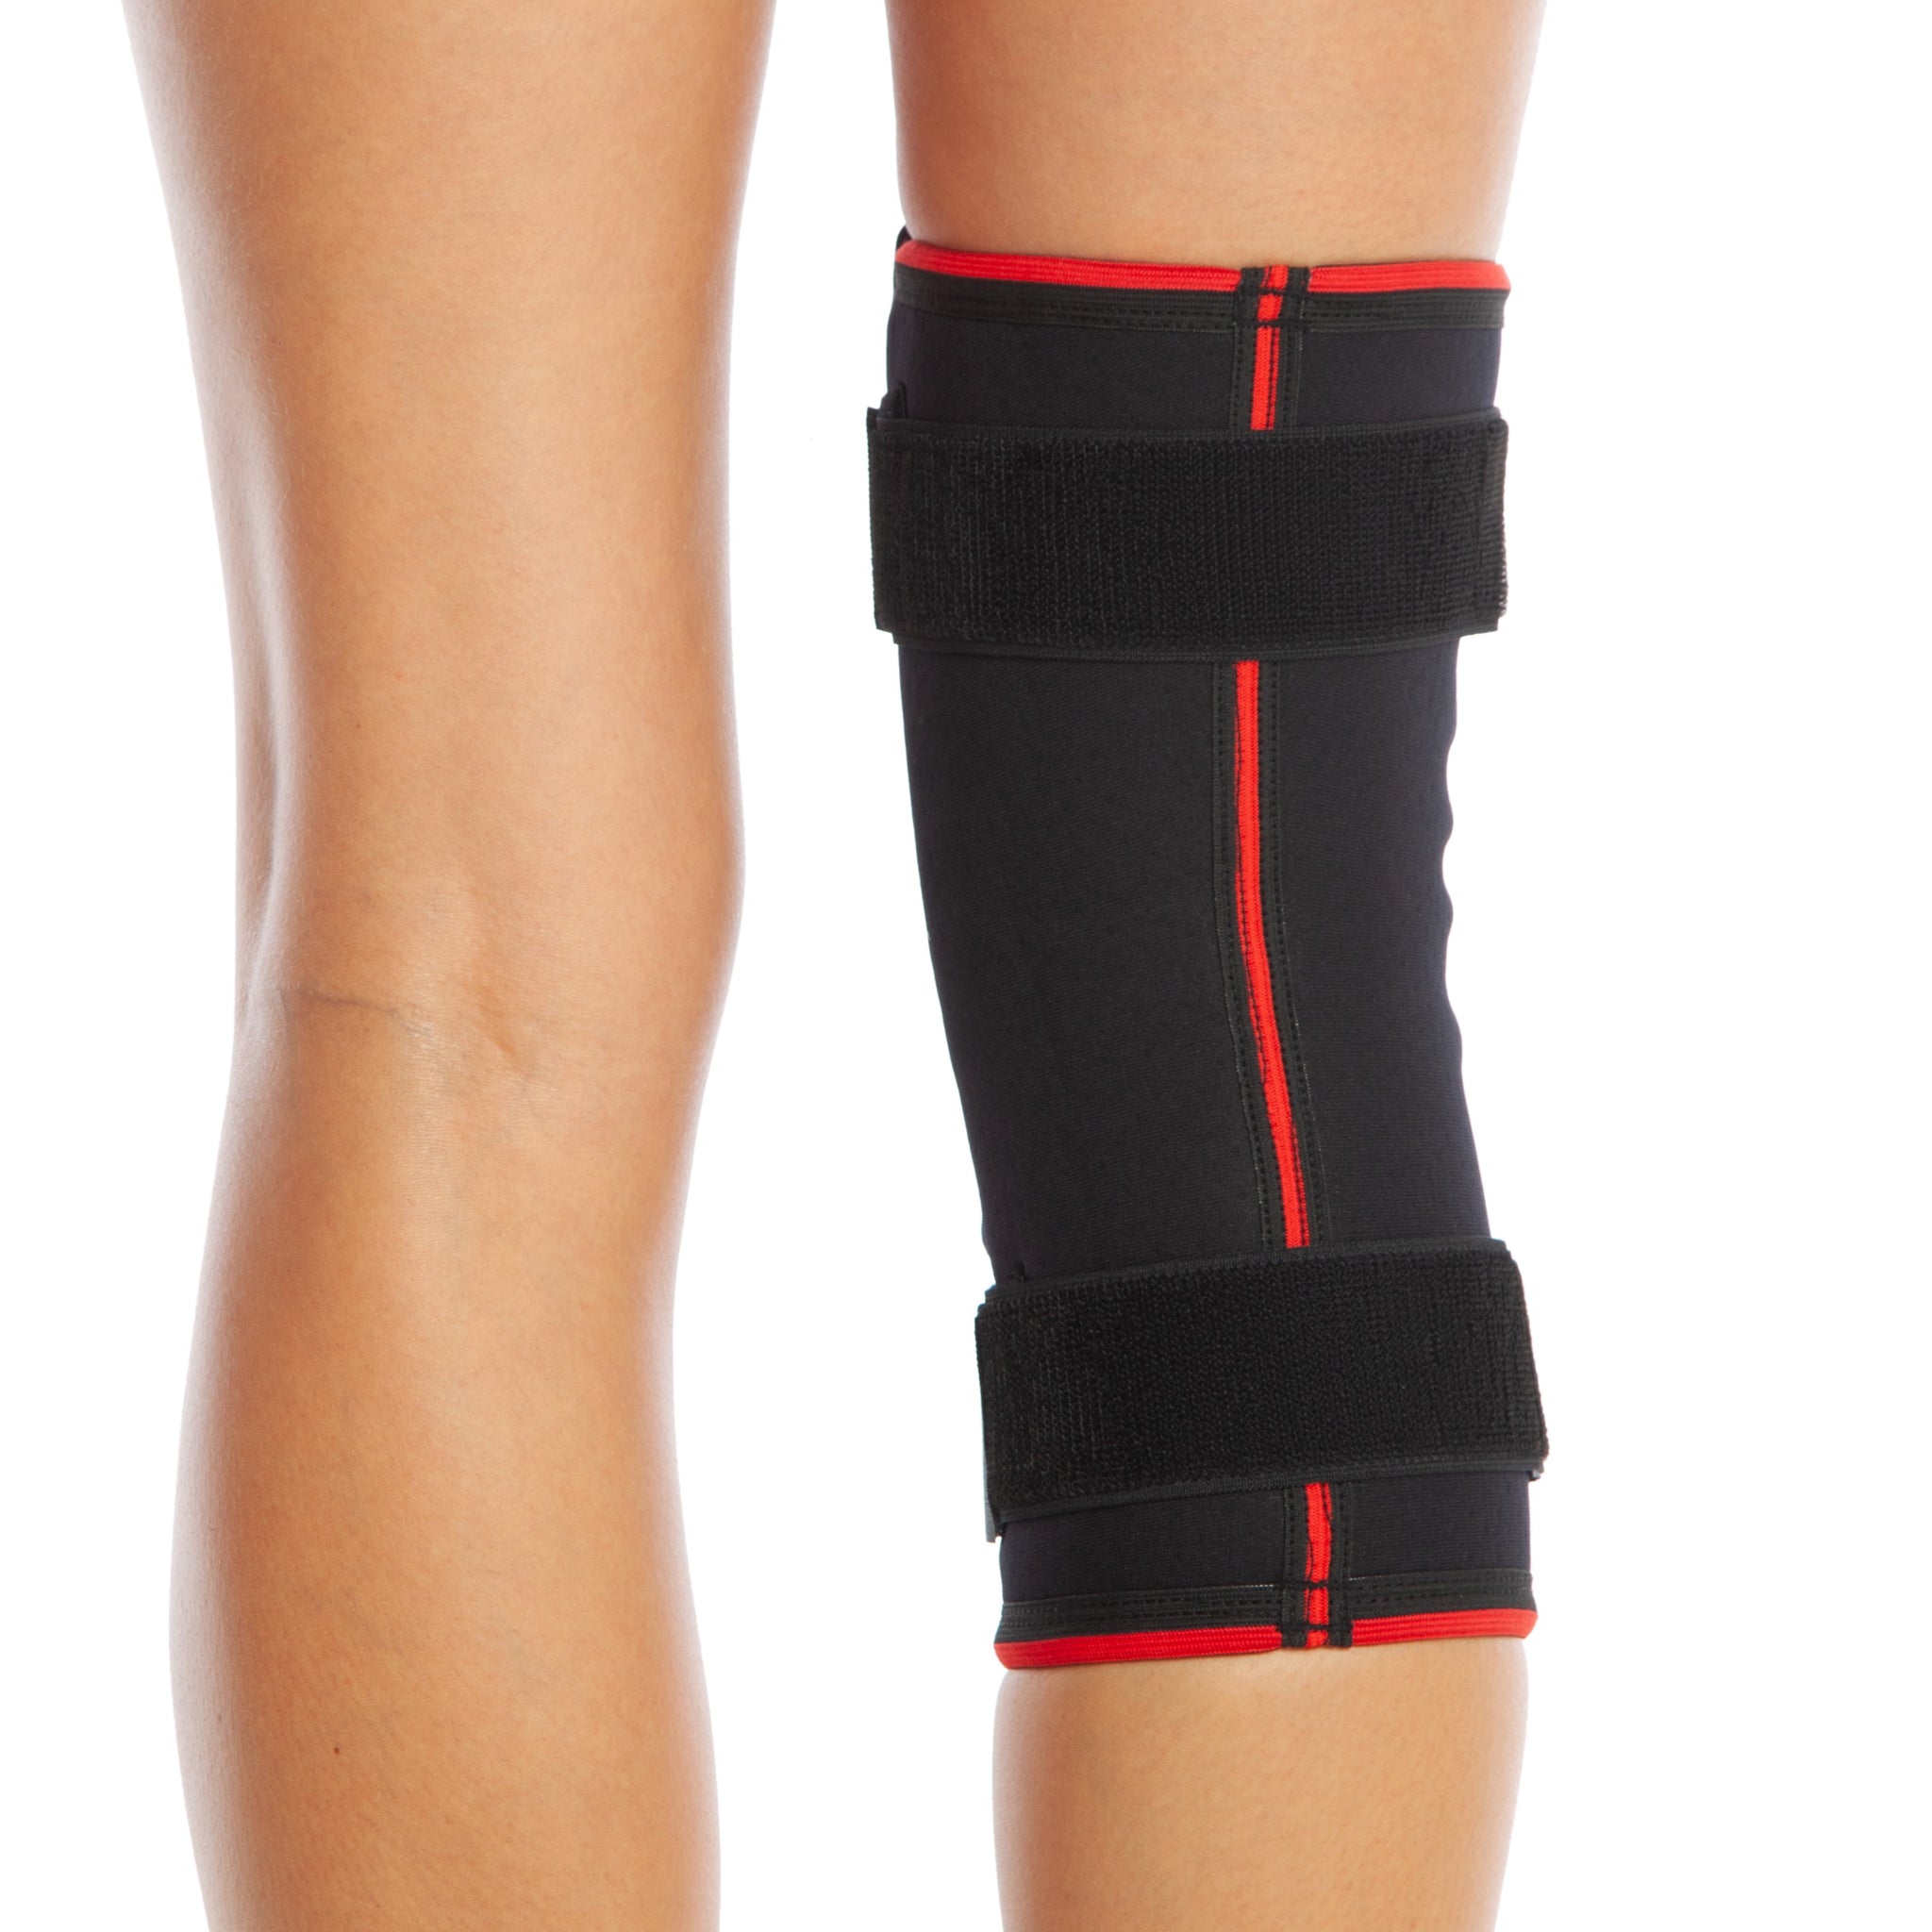 Turkey Manufactured ACL Knee Braces at Medical Import Ltd.